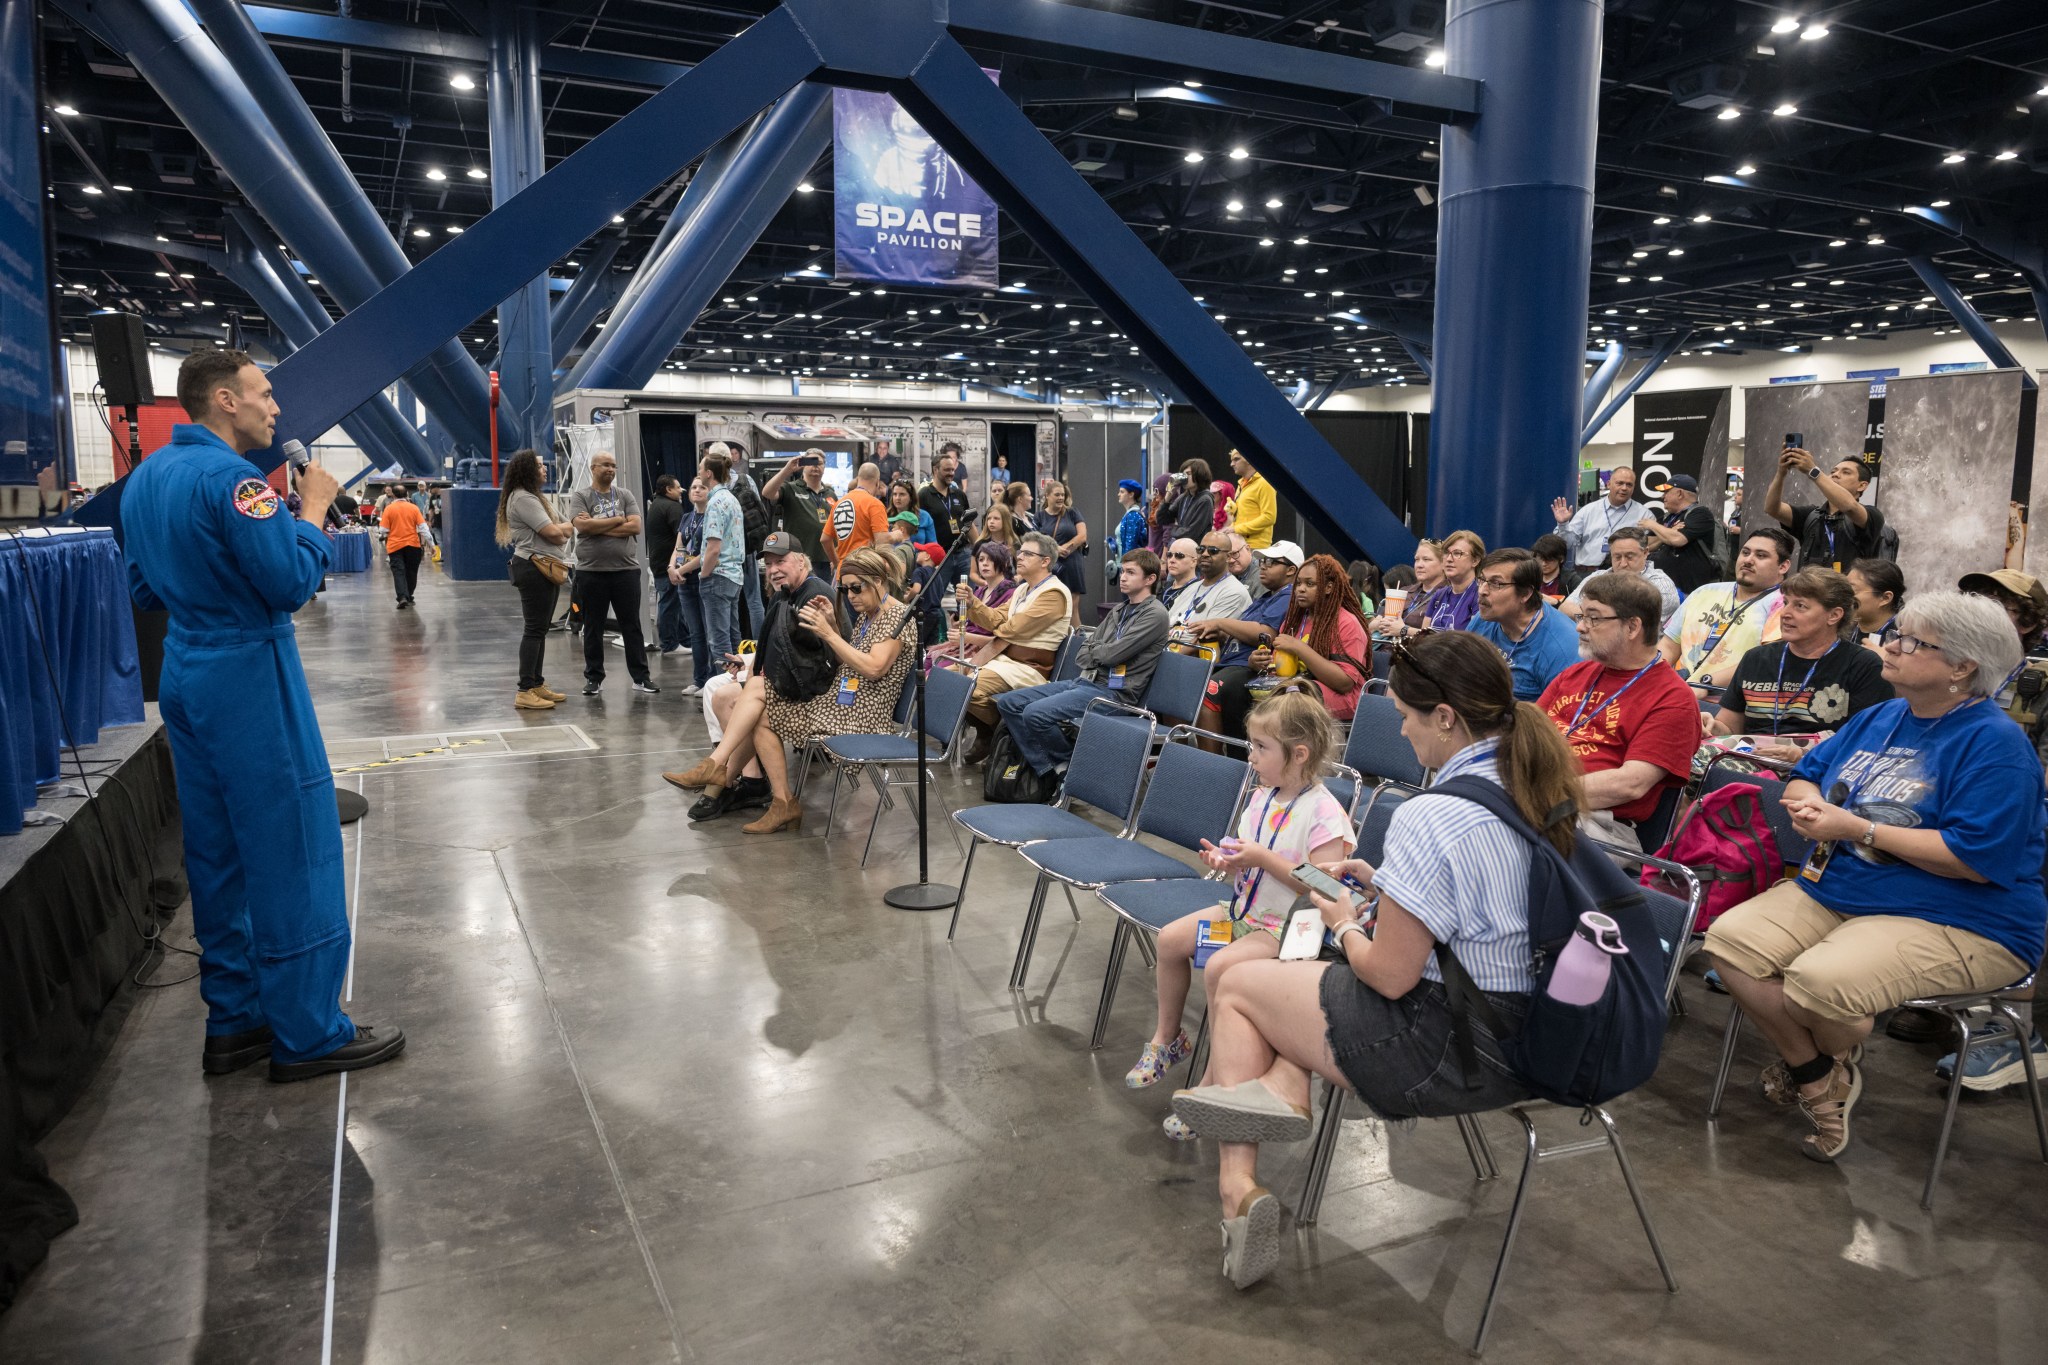 Comicpalooza fans enjoyed compelling presentations and panel discussions at NASA's stage and exhibit booth.